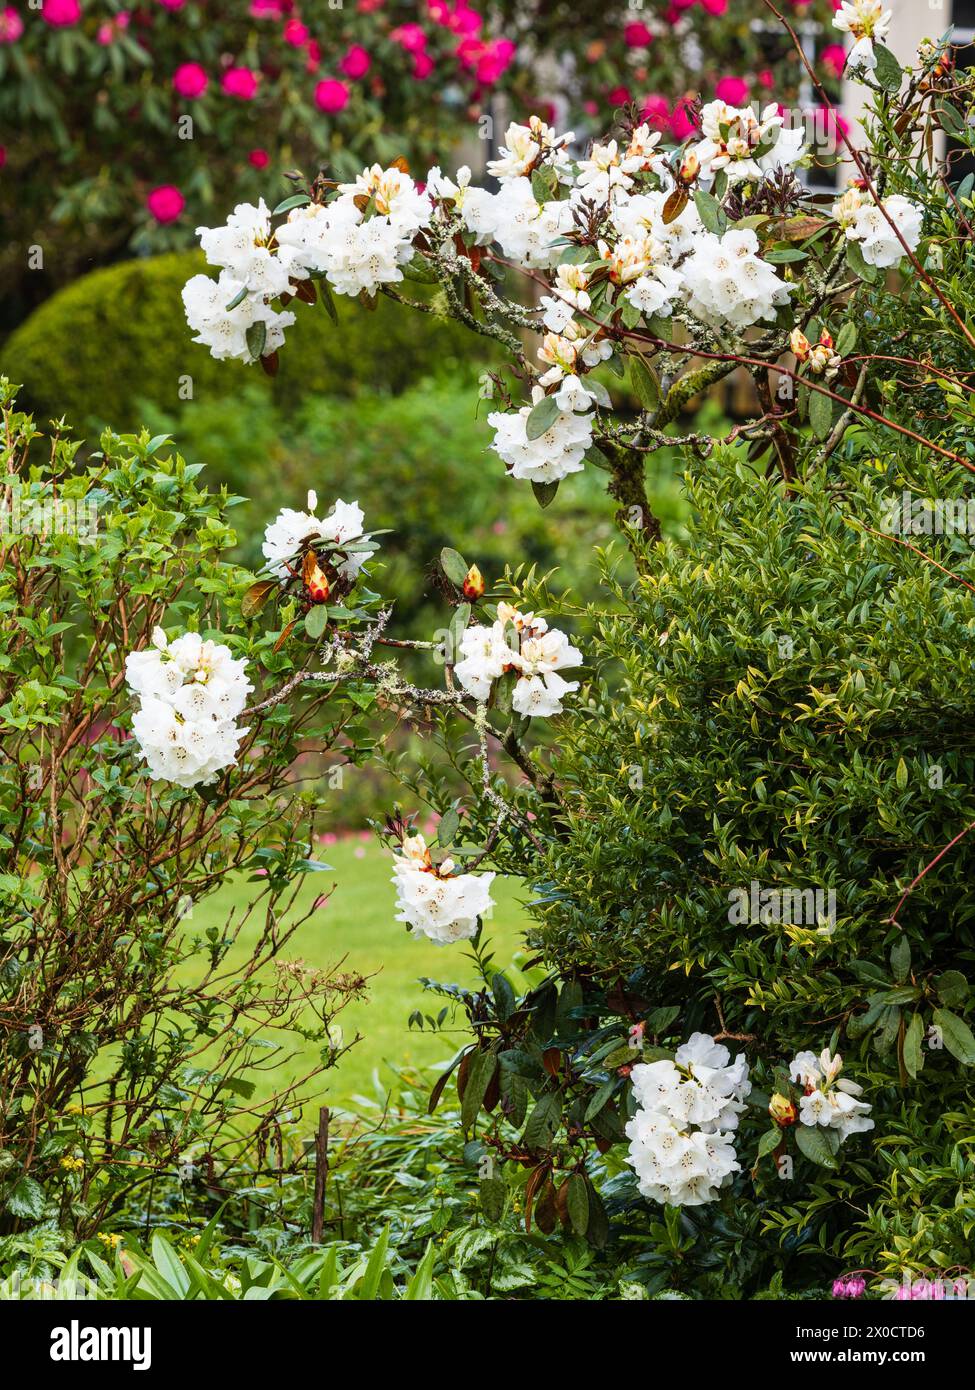 Trusses of white spring flowers of the hardy evergreen shrub, Rhododendron bureavii Stock Photo